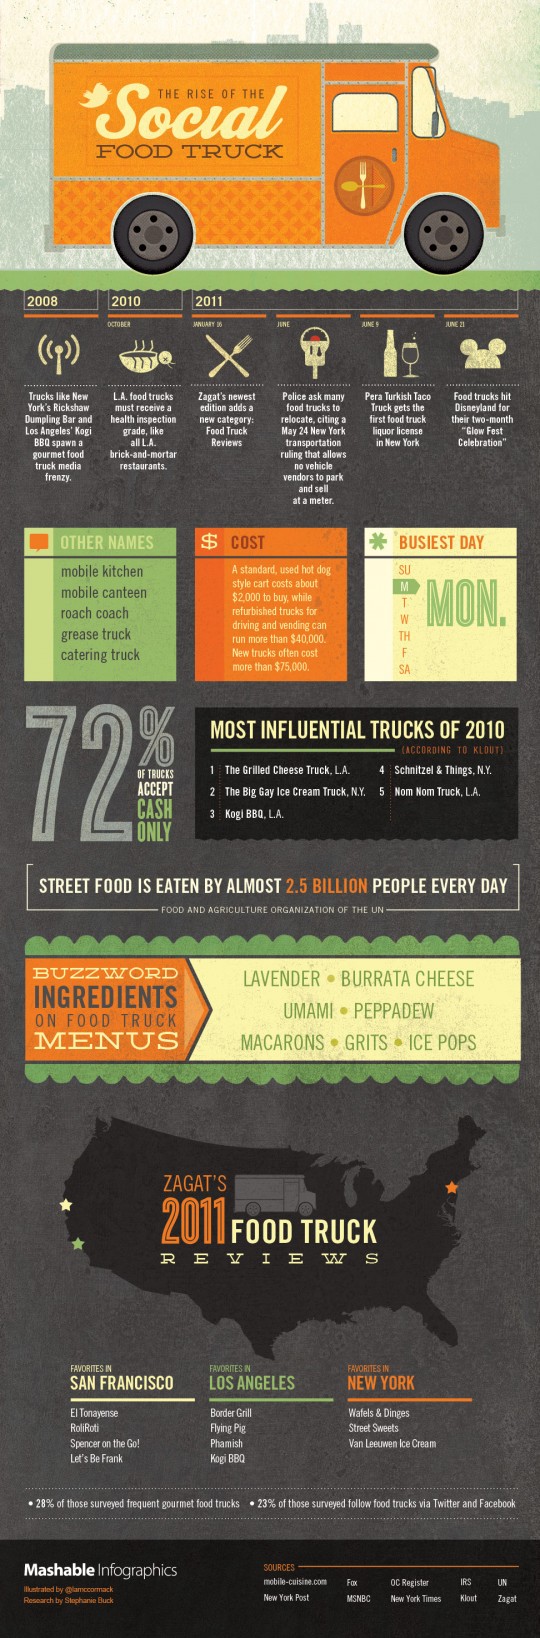 The Rise of the Social Food Truck